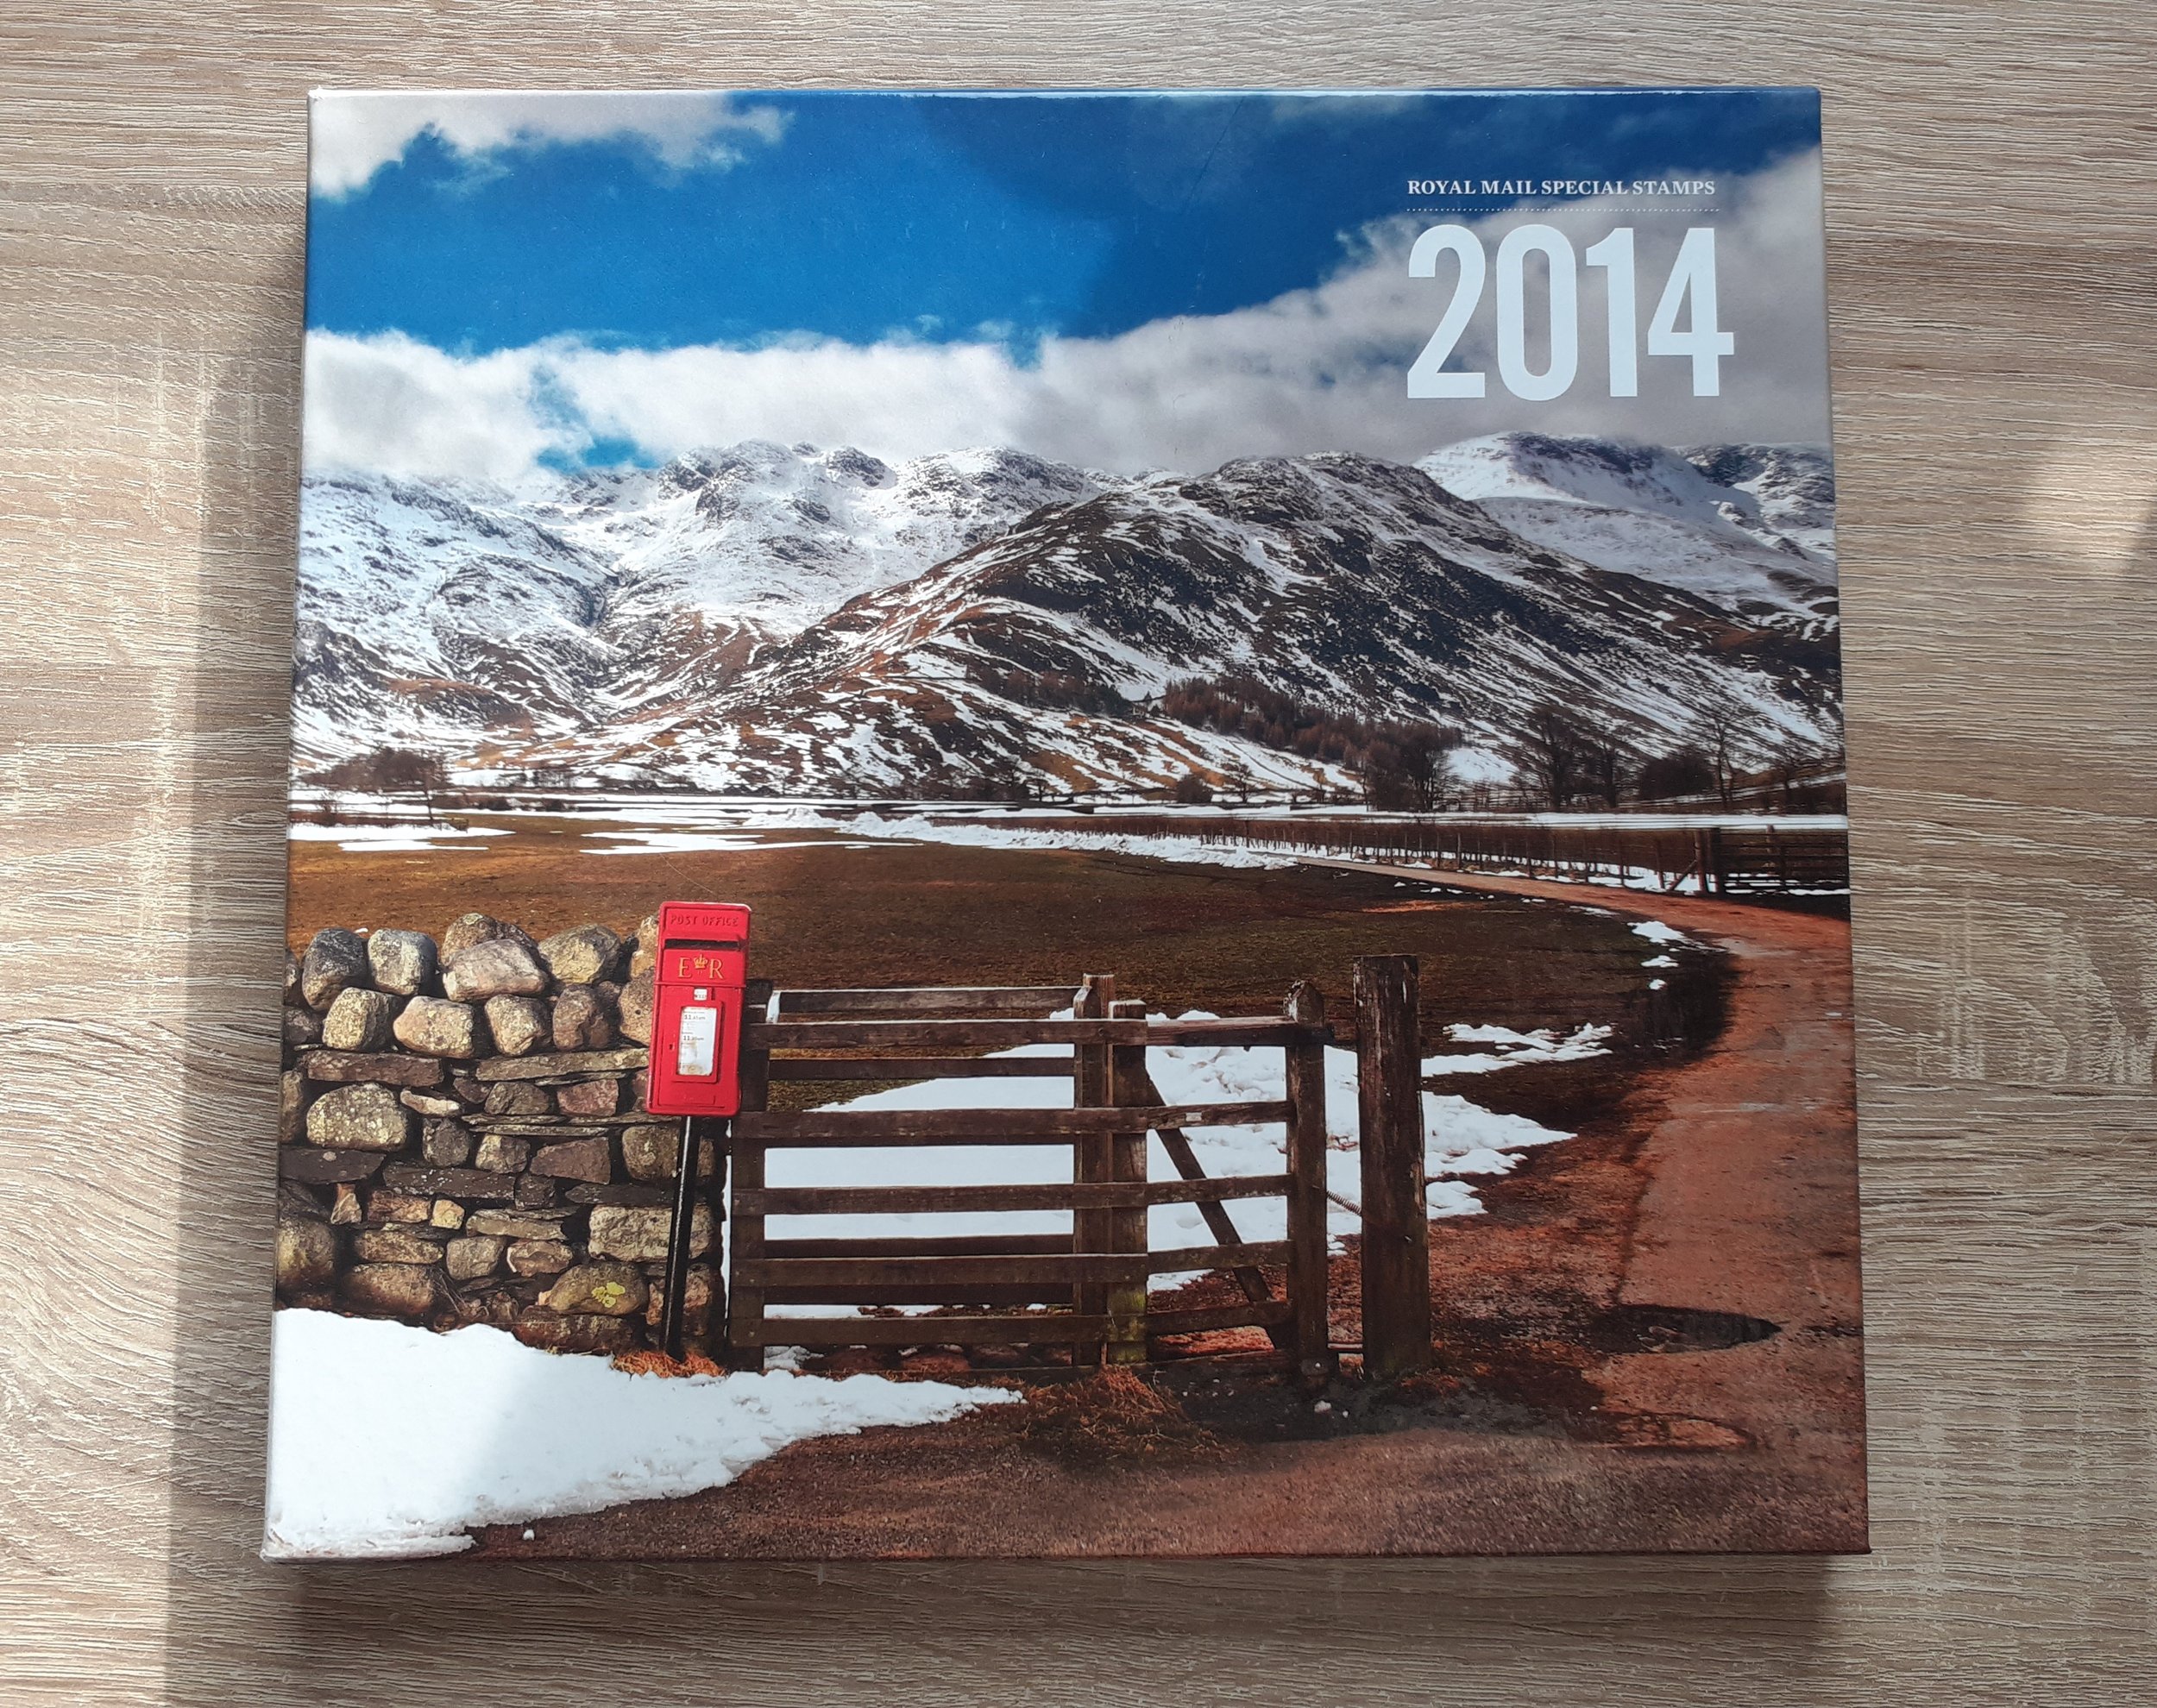 GB 2014 Special Stamp Year Book.